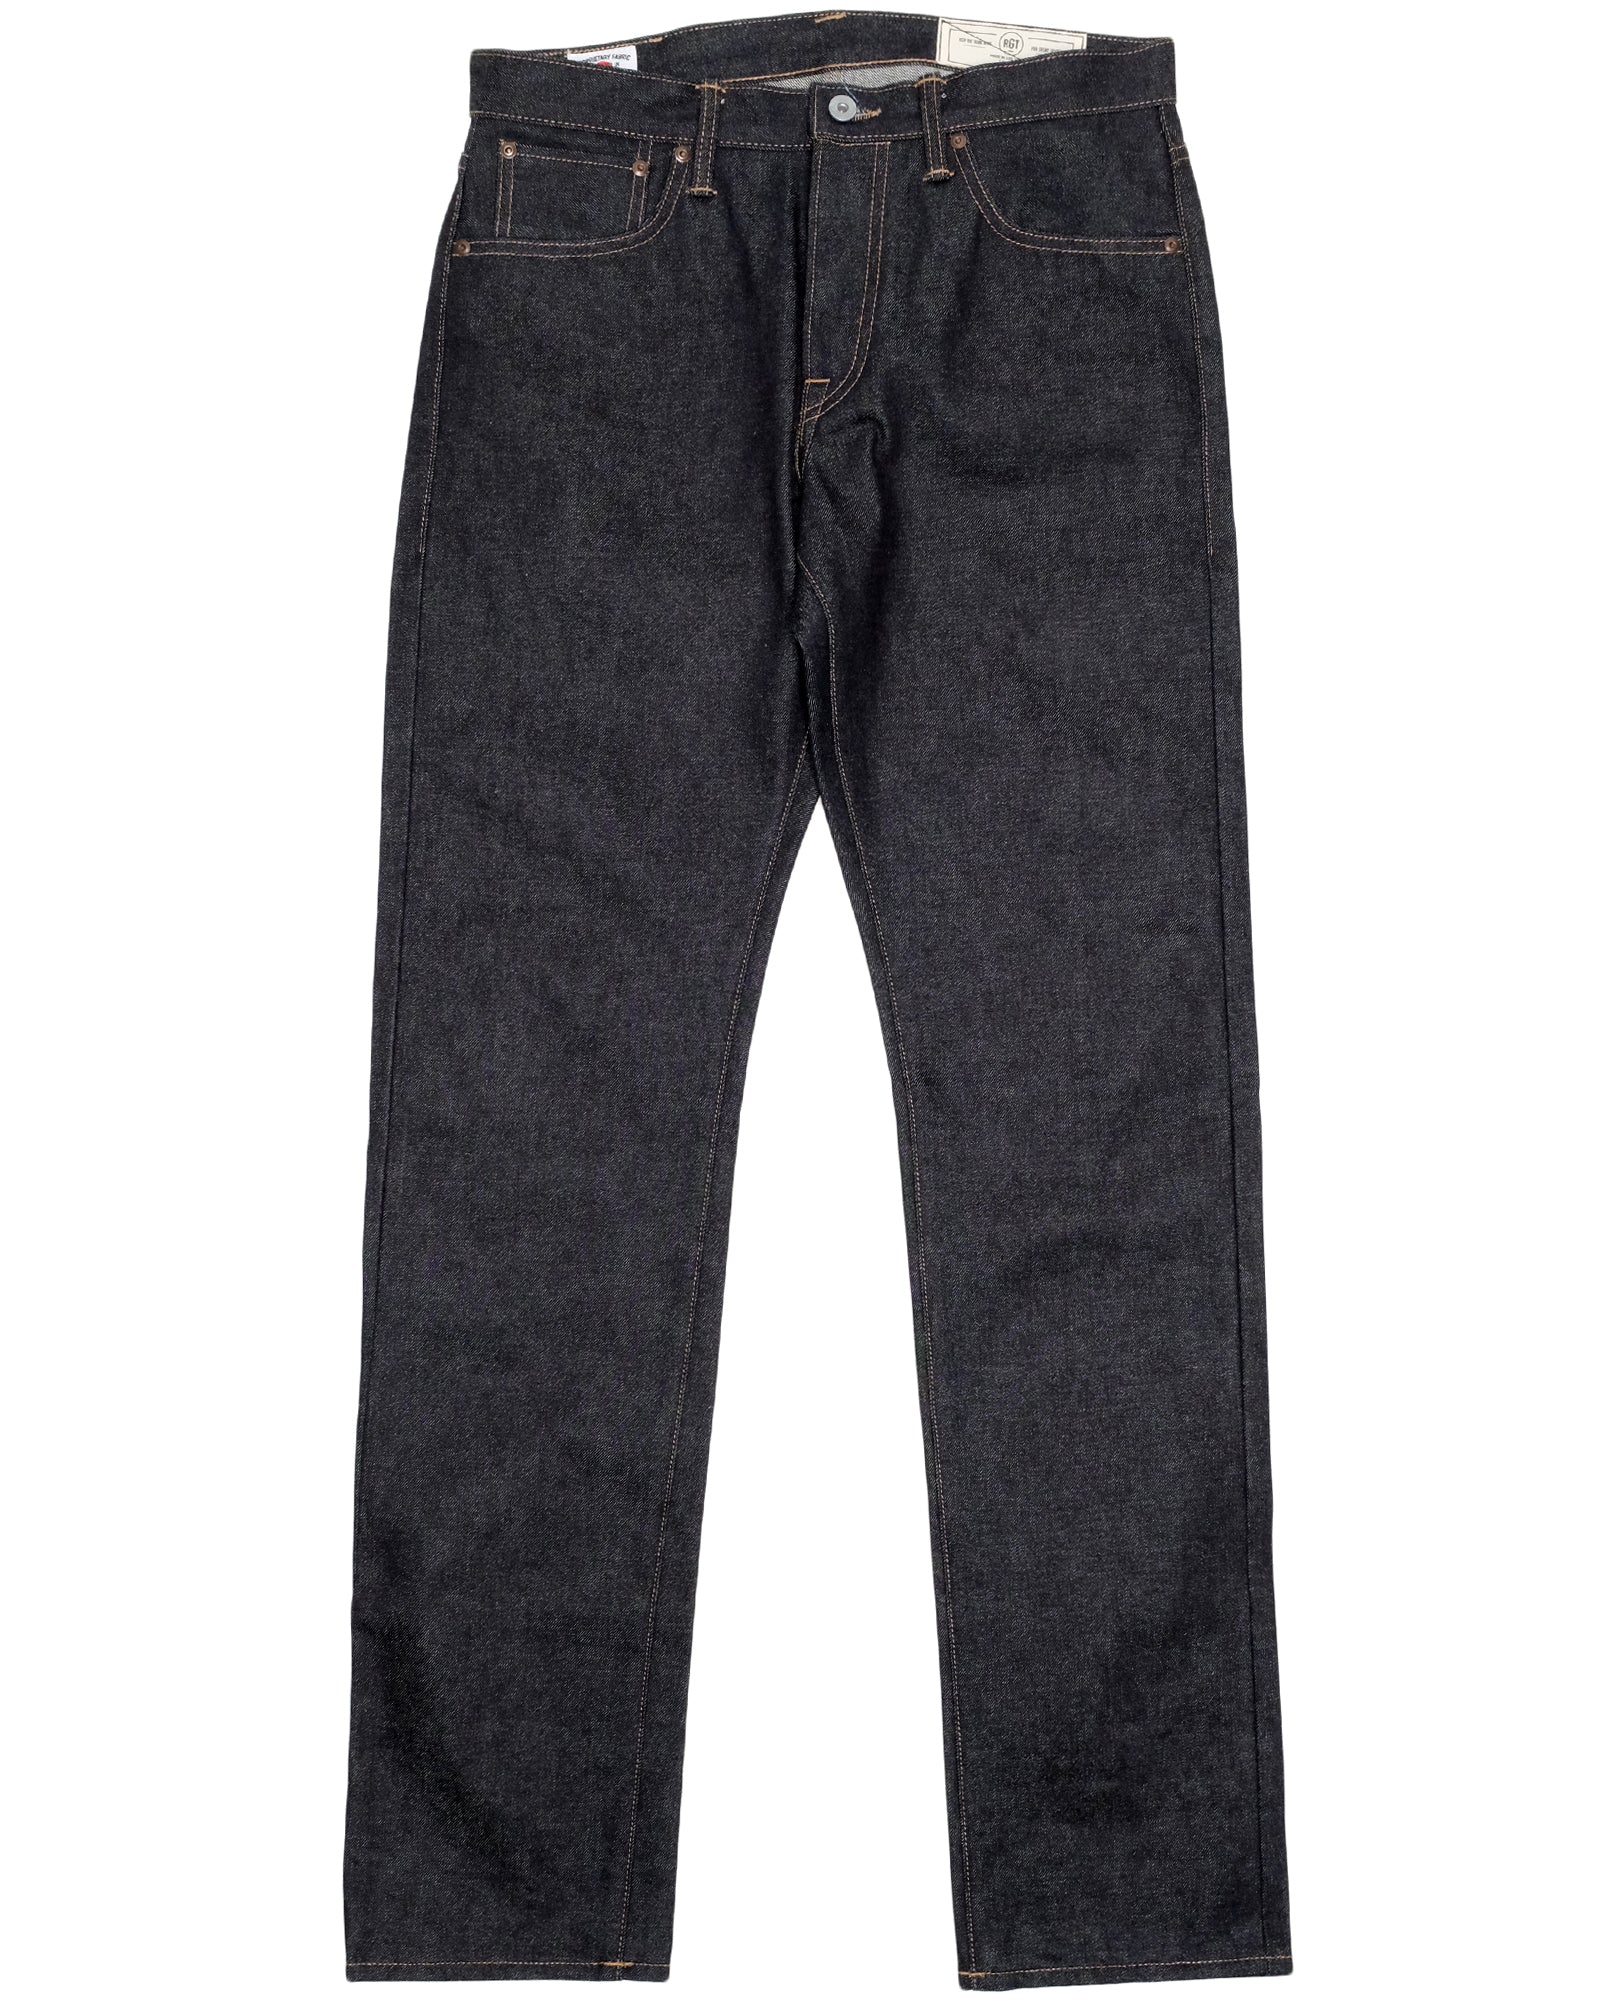 15 oz. Standard Issue in Indigo-Pants-Rogue Territory-General Quarters